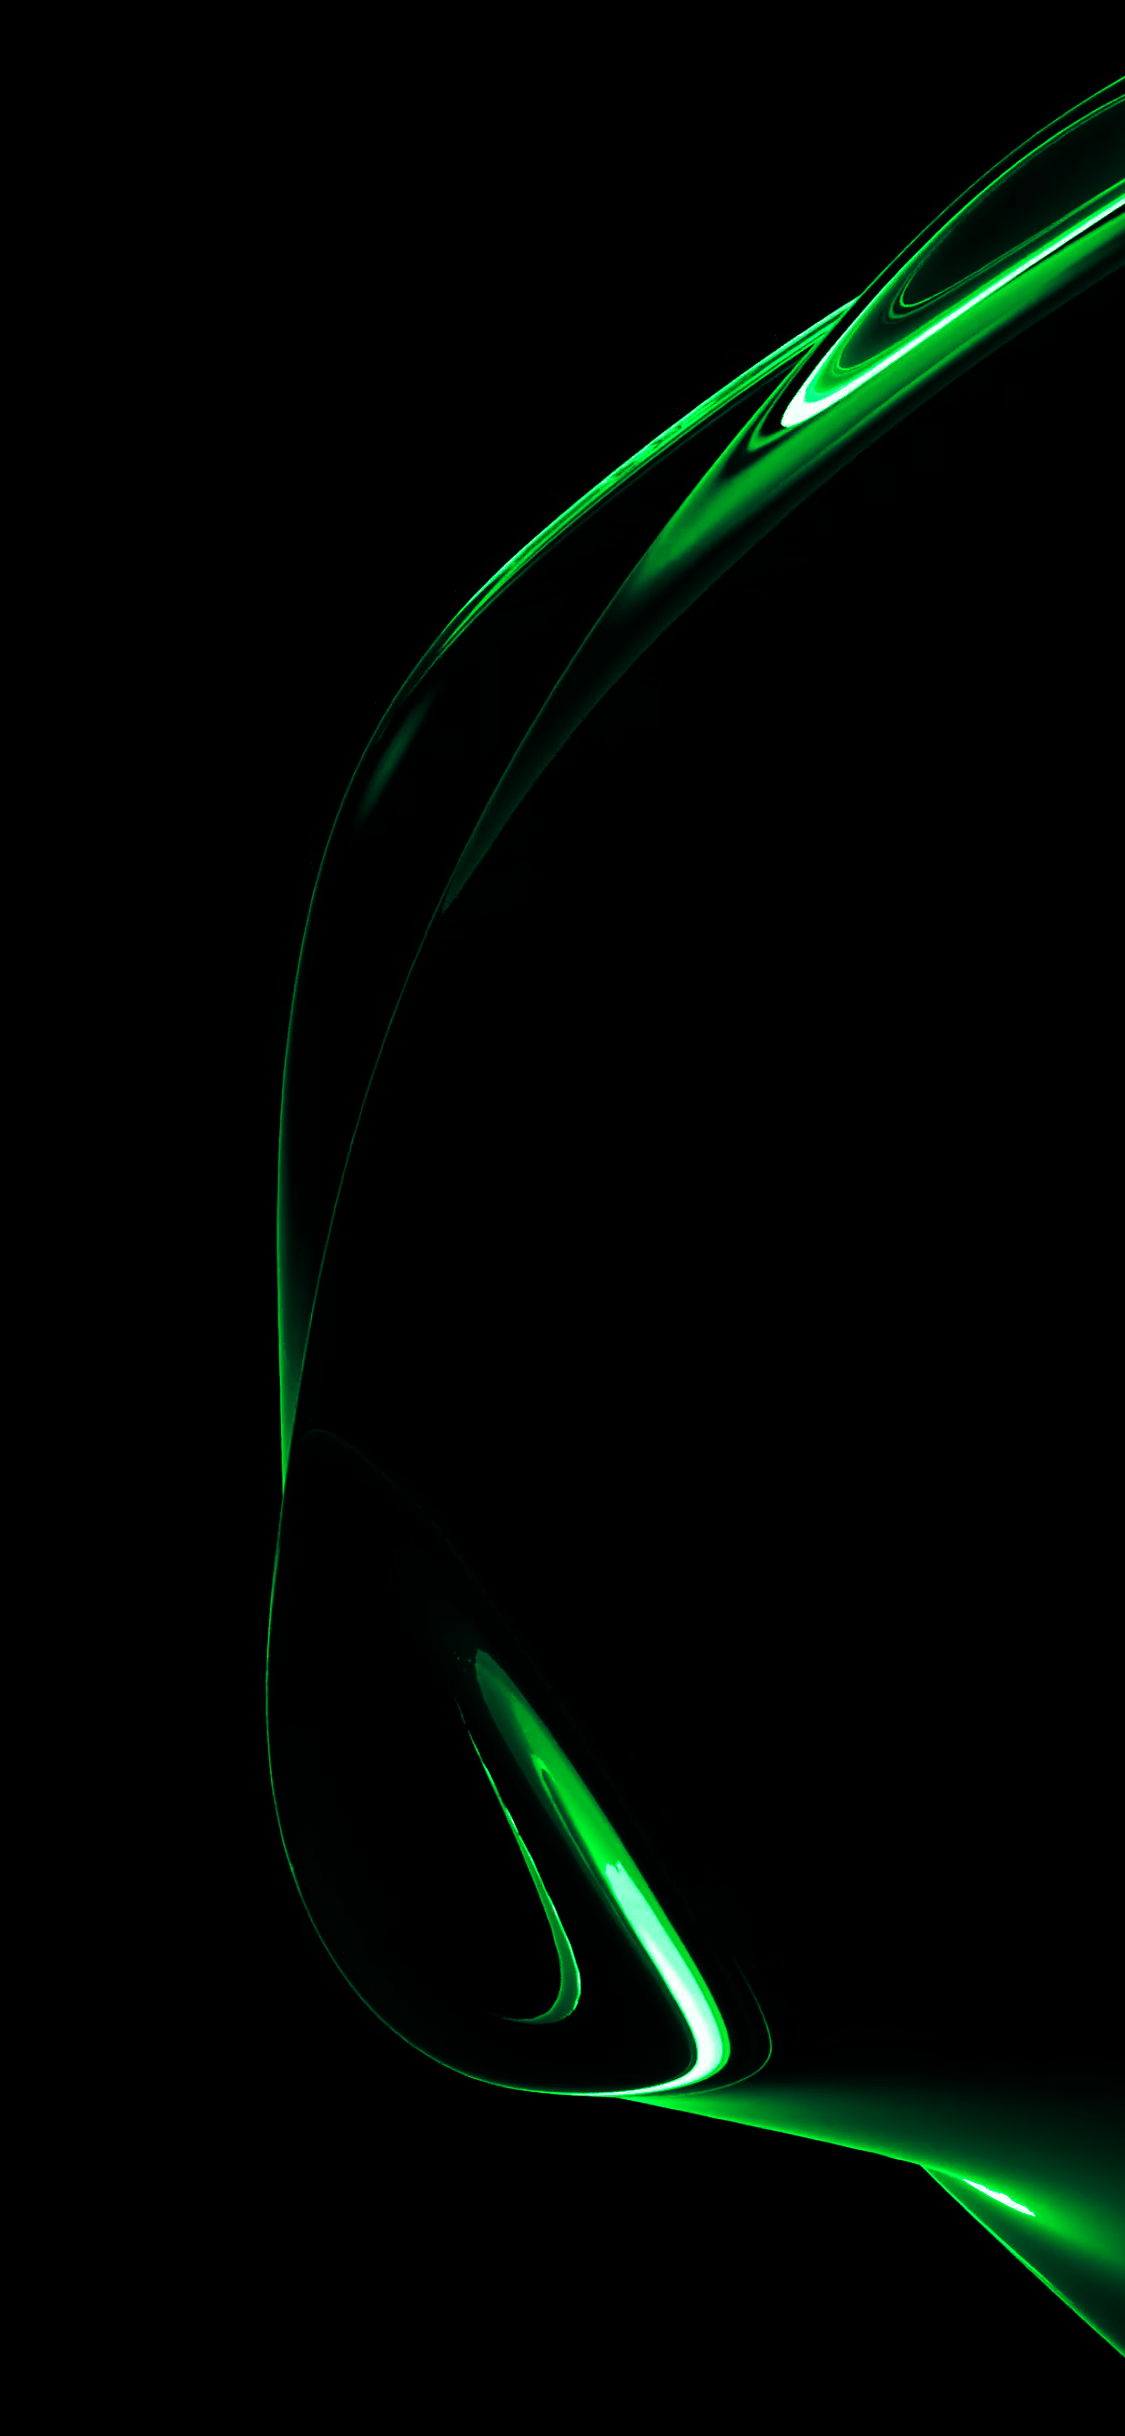 Oled 4k iPhone 11 Pro Max Wallpapers - Wallpaper Cave